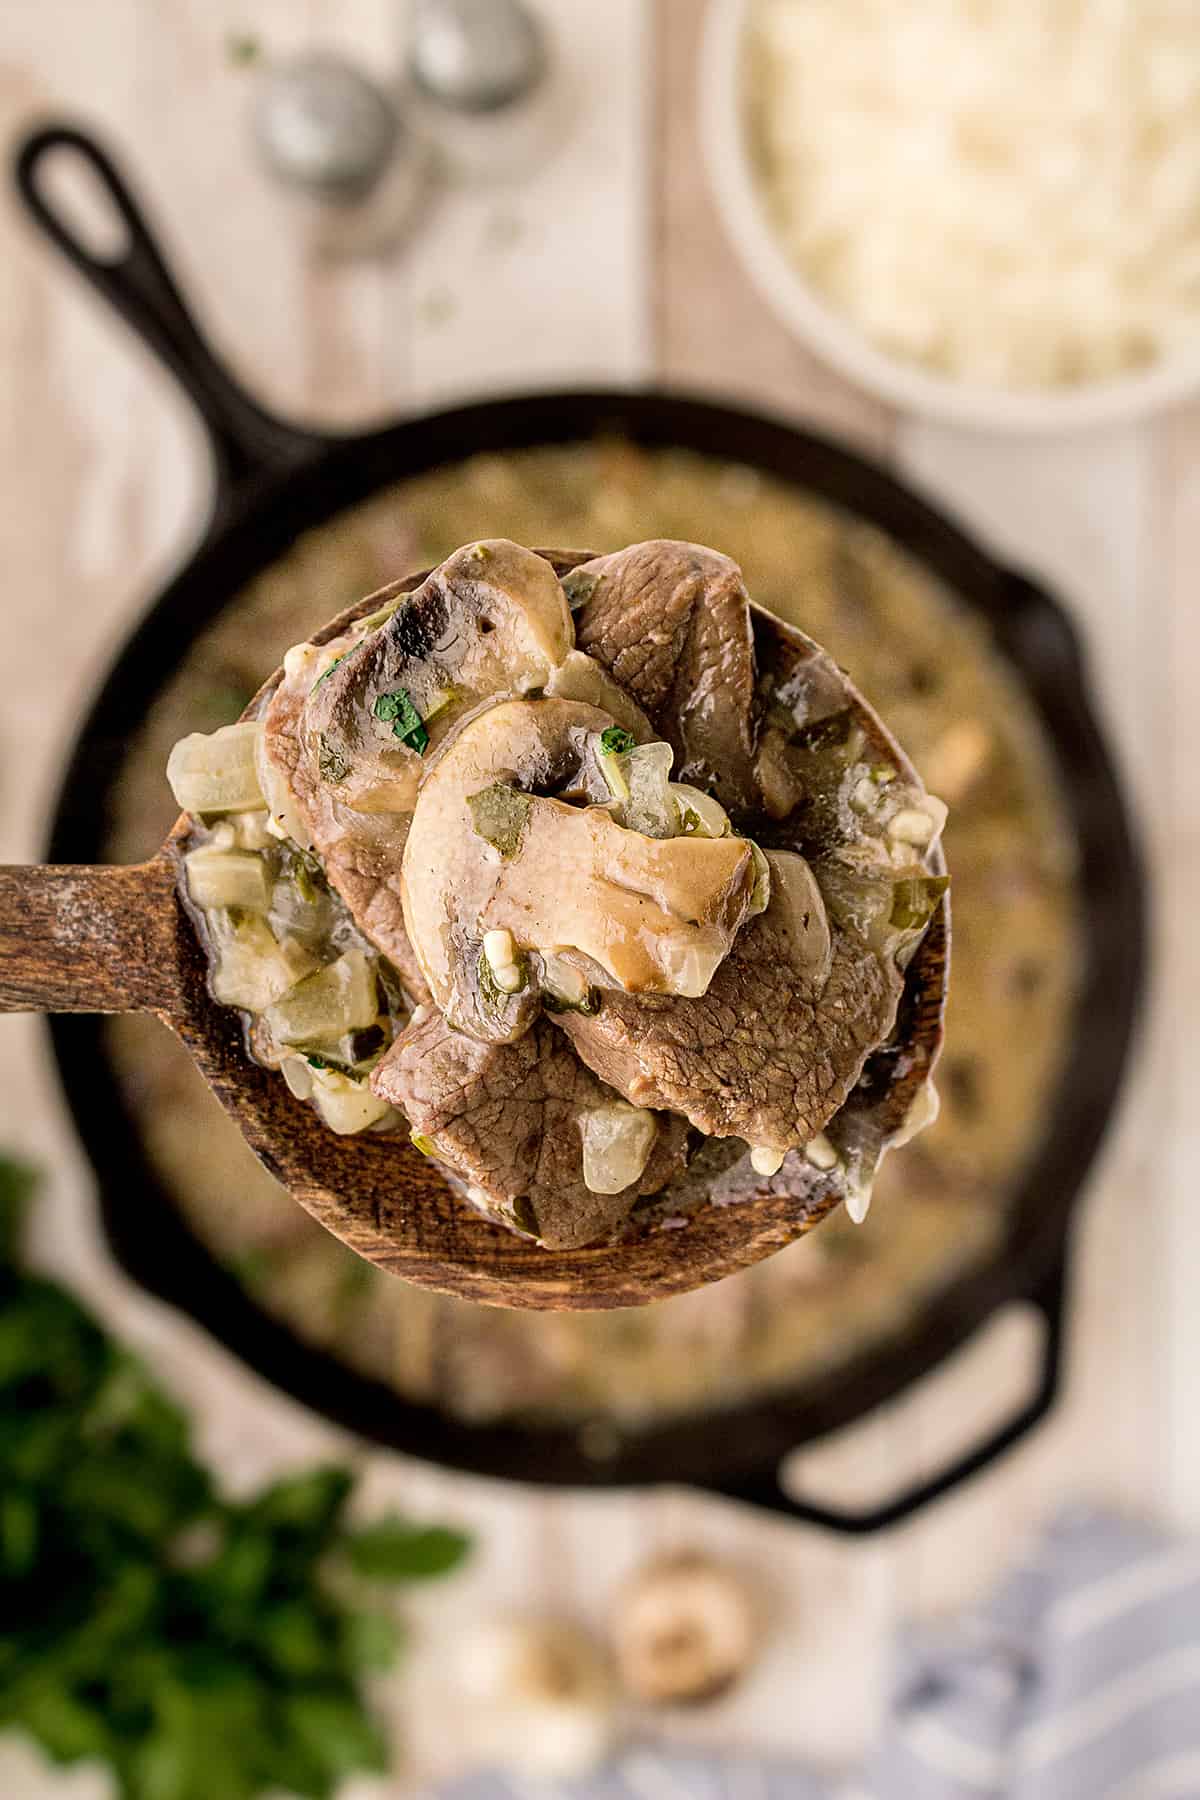 Wooden spoon holding a serving of Steak Tips with Creamy Mushroom Sauce.